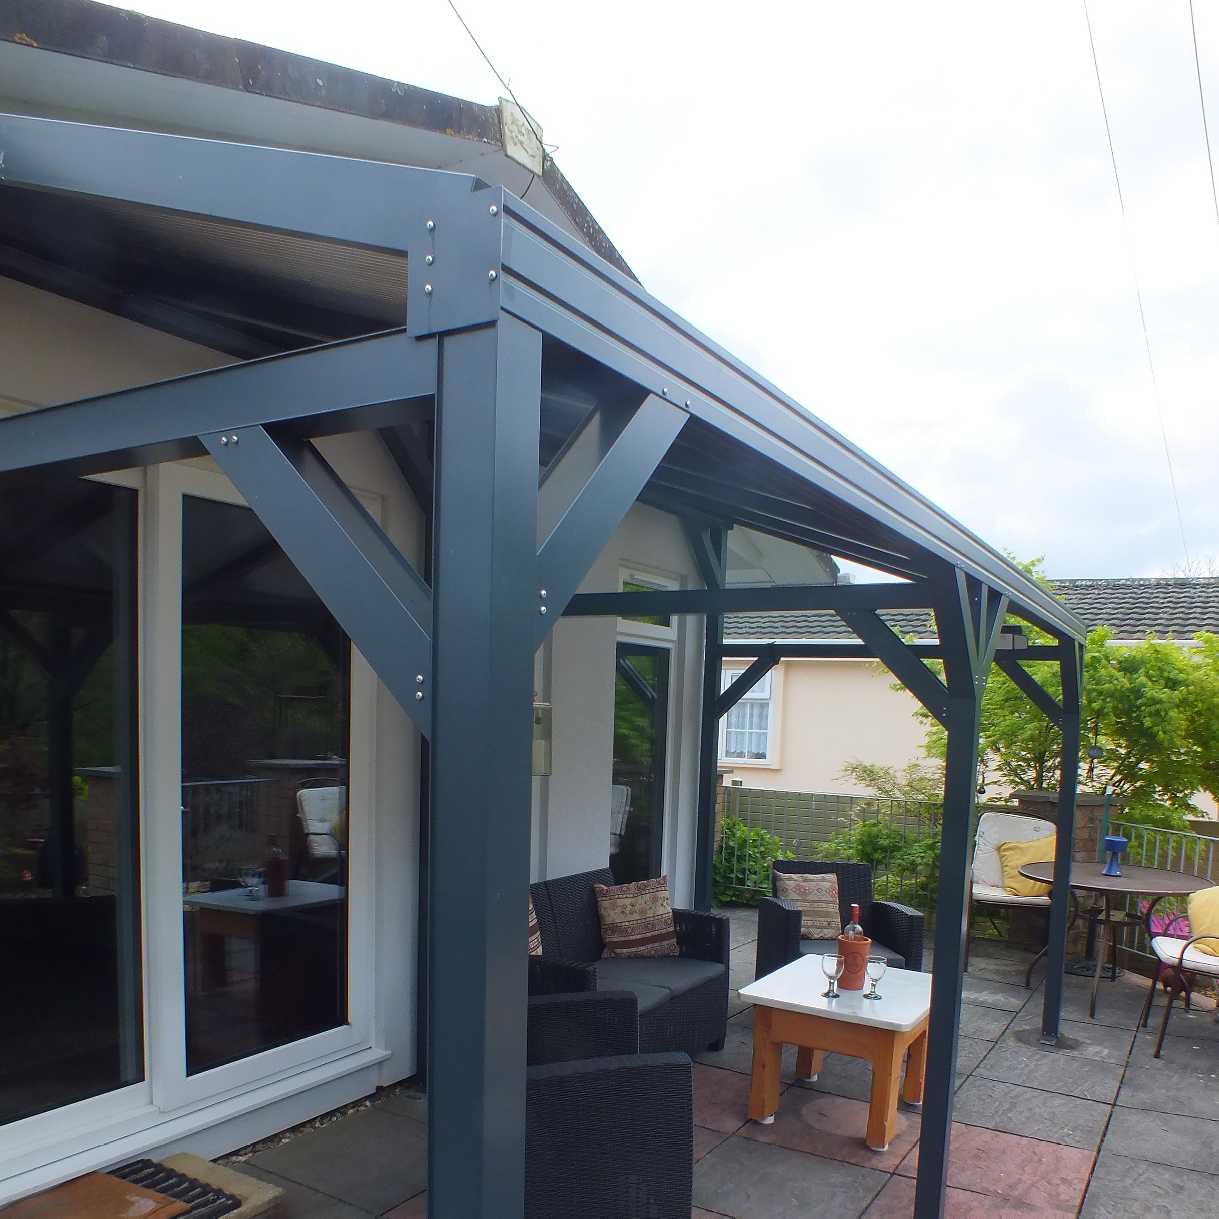 Affordable Omega Smart Free-Standing, Anthracite Grey MonoPitch Roof Canopy with 16mm Polycarbonate Glazing - 4.2m (W) x 2.0m (P), (6) Supporting Posts